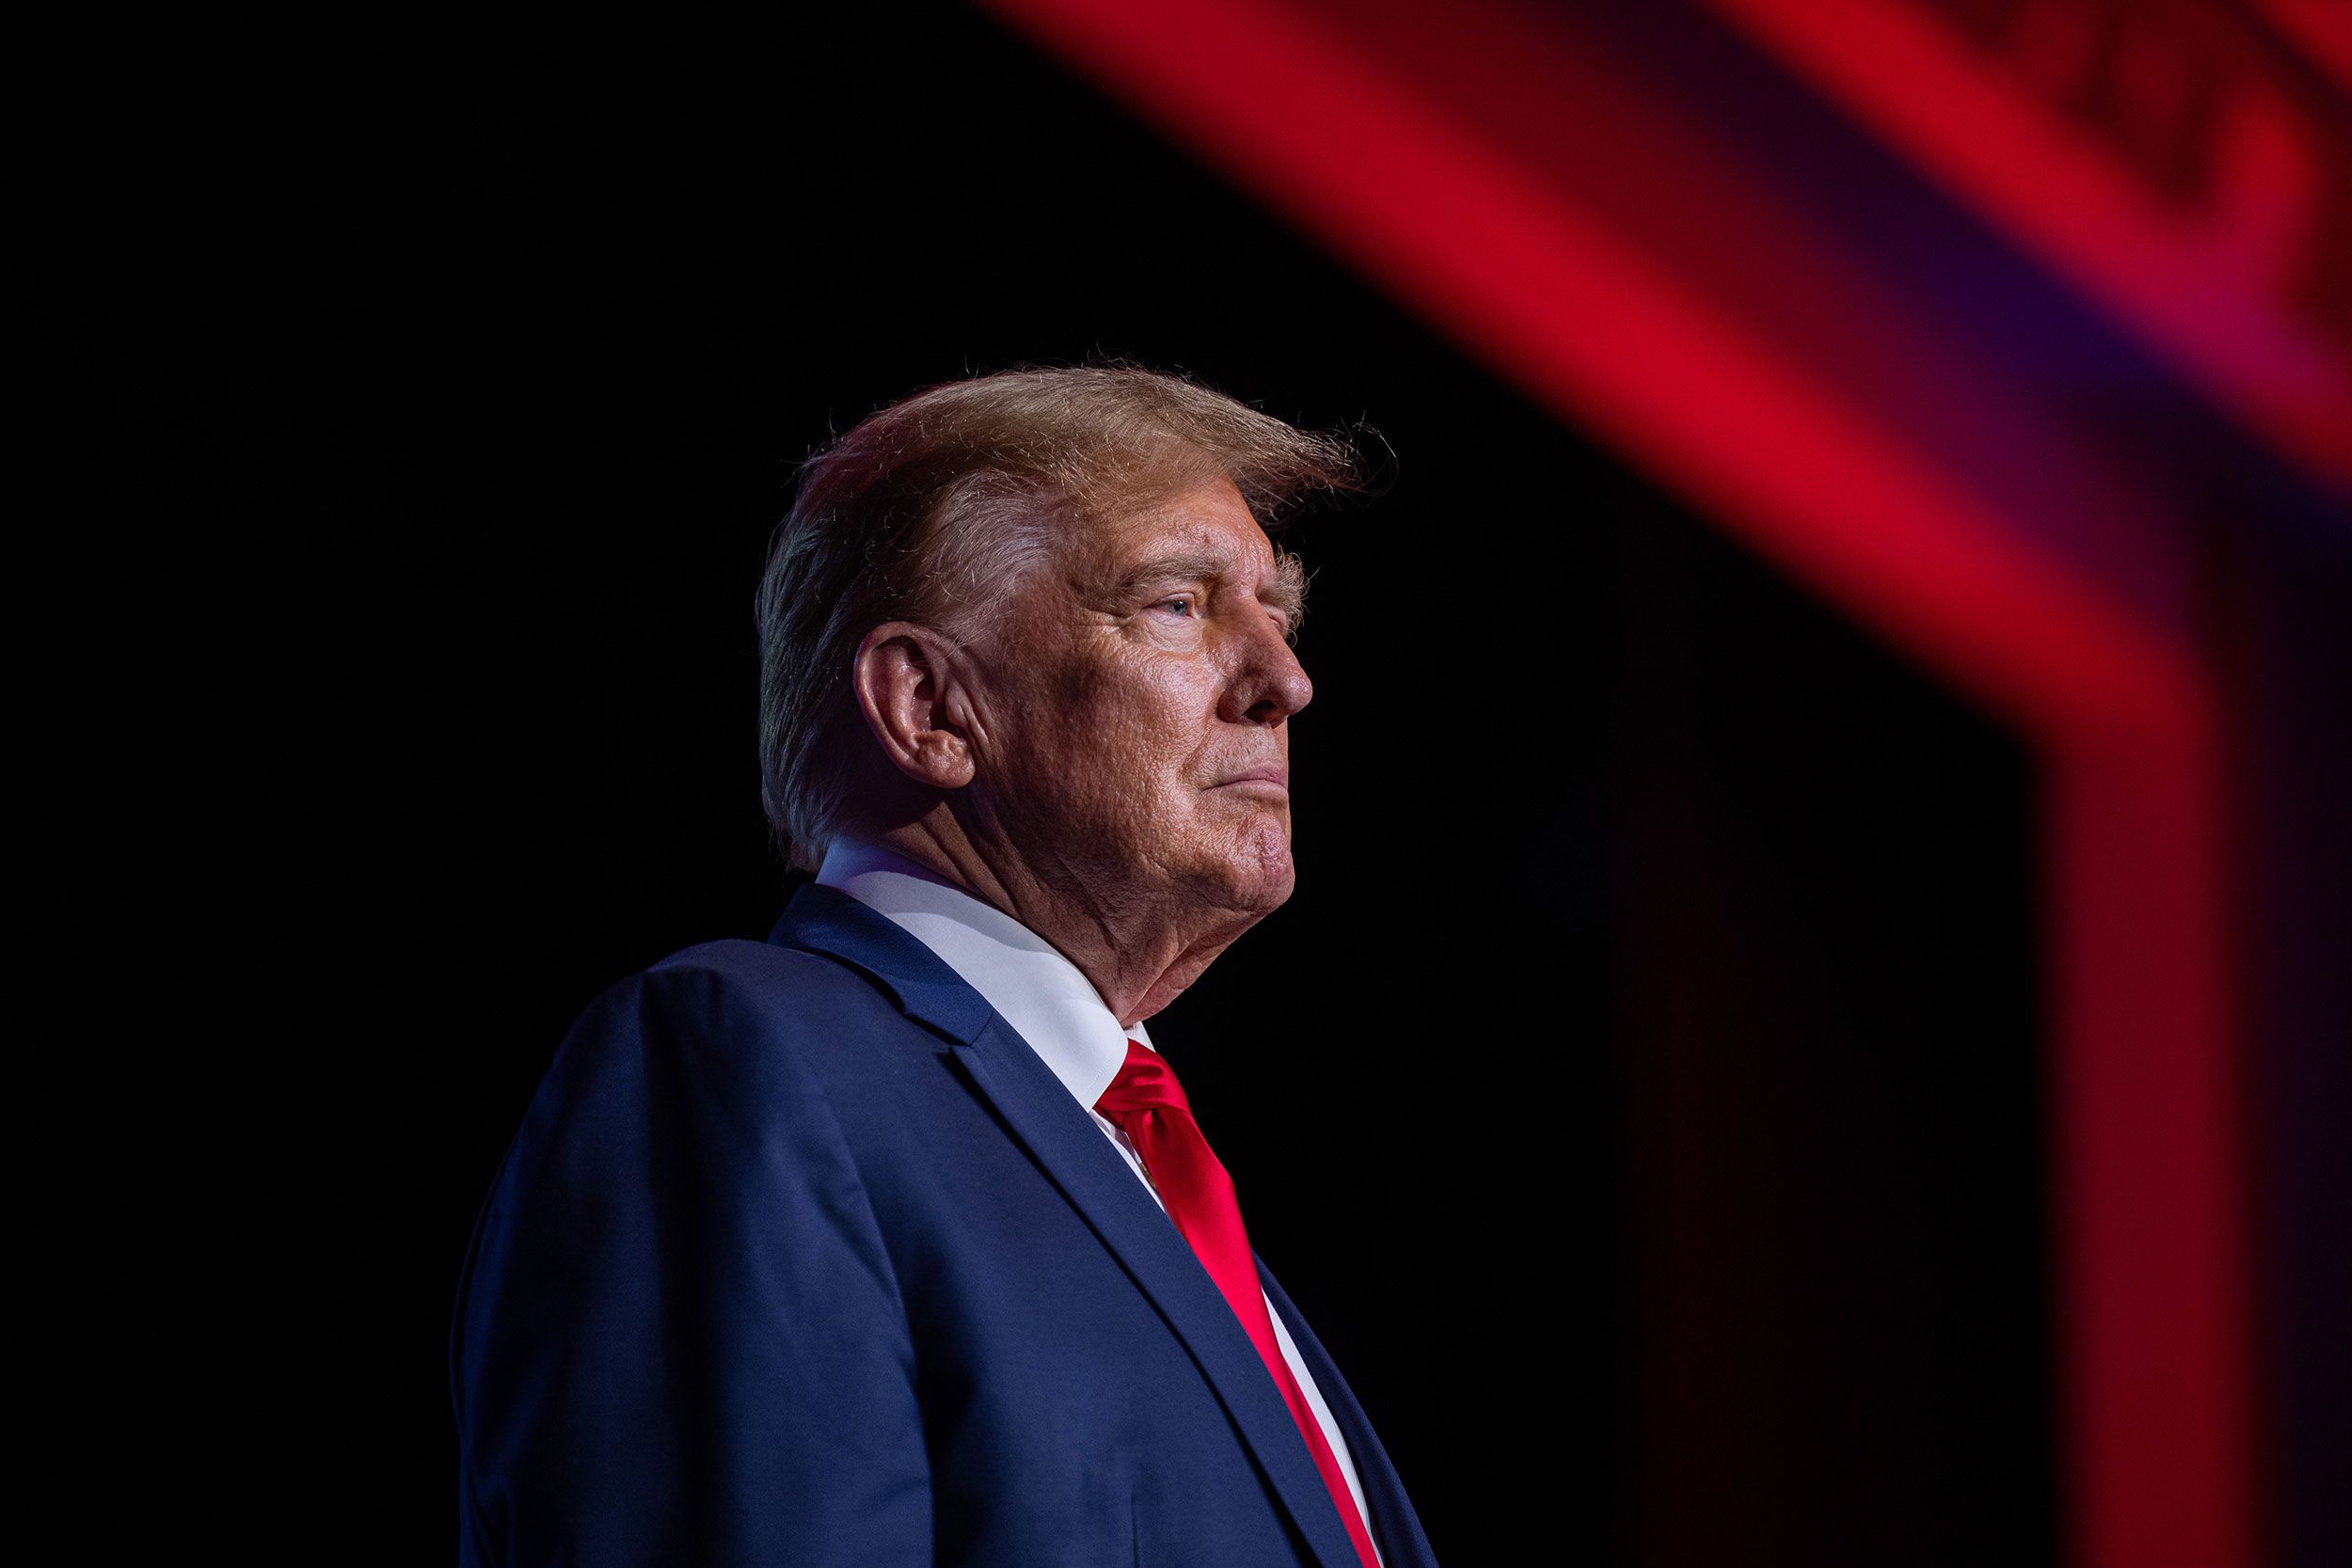 Former President Donald Trump stands on stage during the 2024 NRB International Christian Media Convention Presidential Forum at The Gaylord Opryland Resort and Convention Center on February 22 in Nashville, Tennessee.